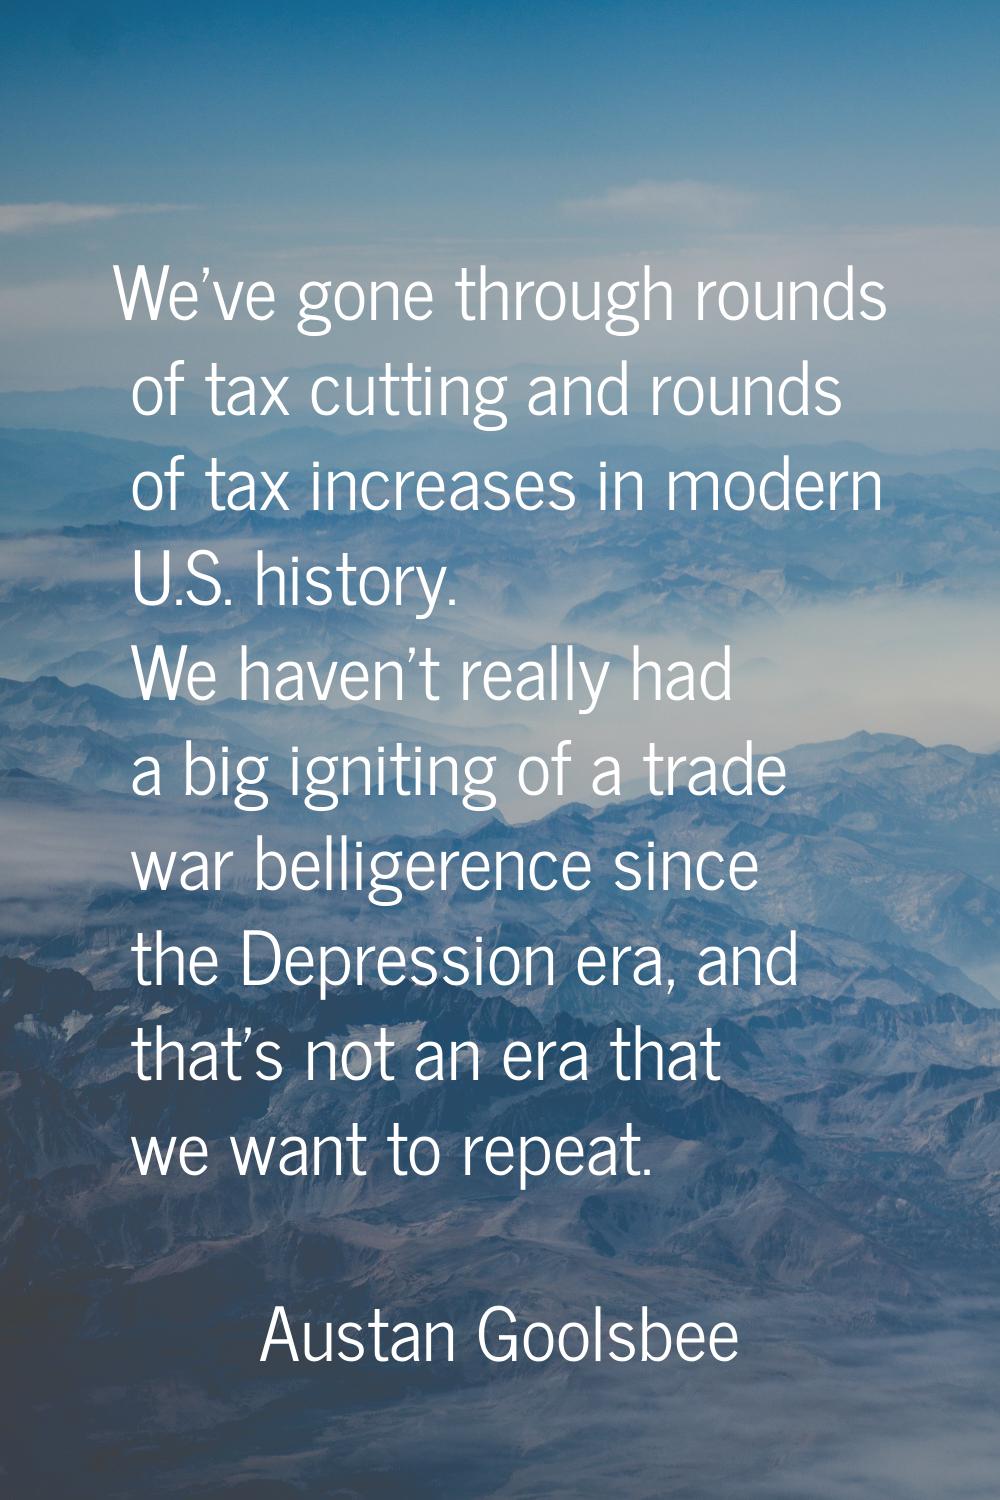 We've gone through rounds of tax cutting and rounds of tax increases in modern U.S. history. We hav